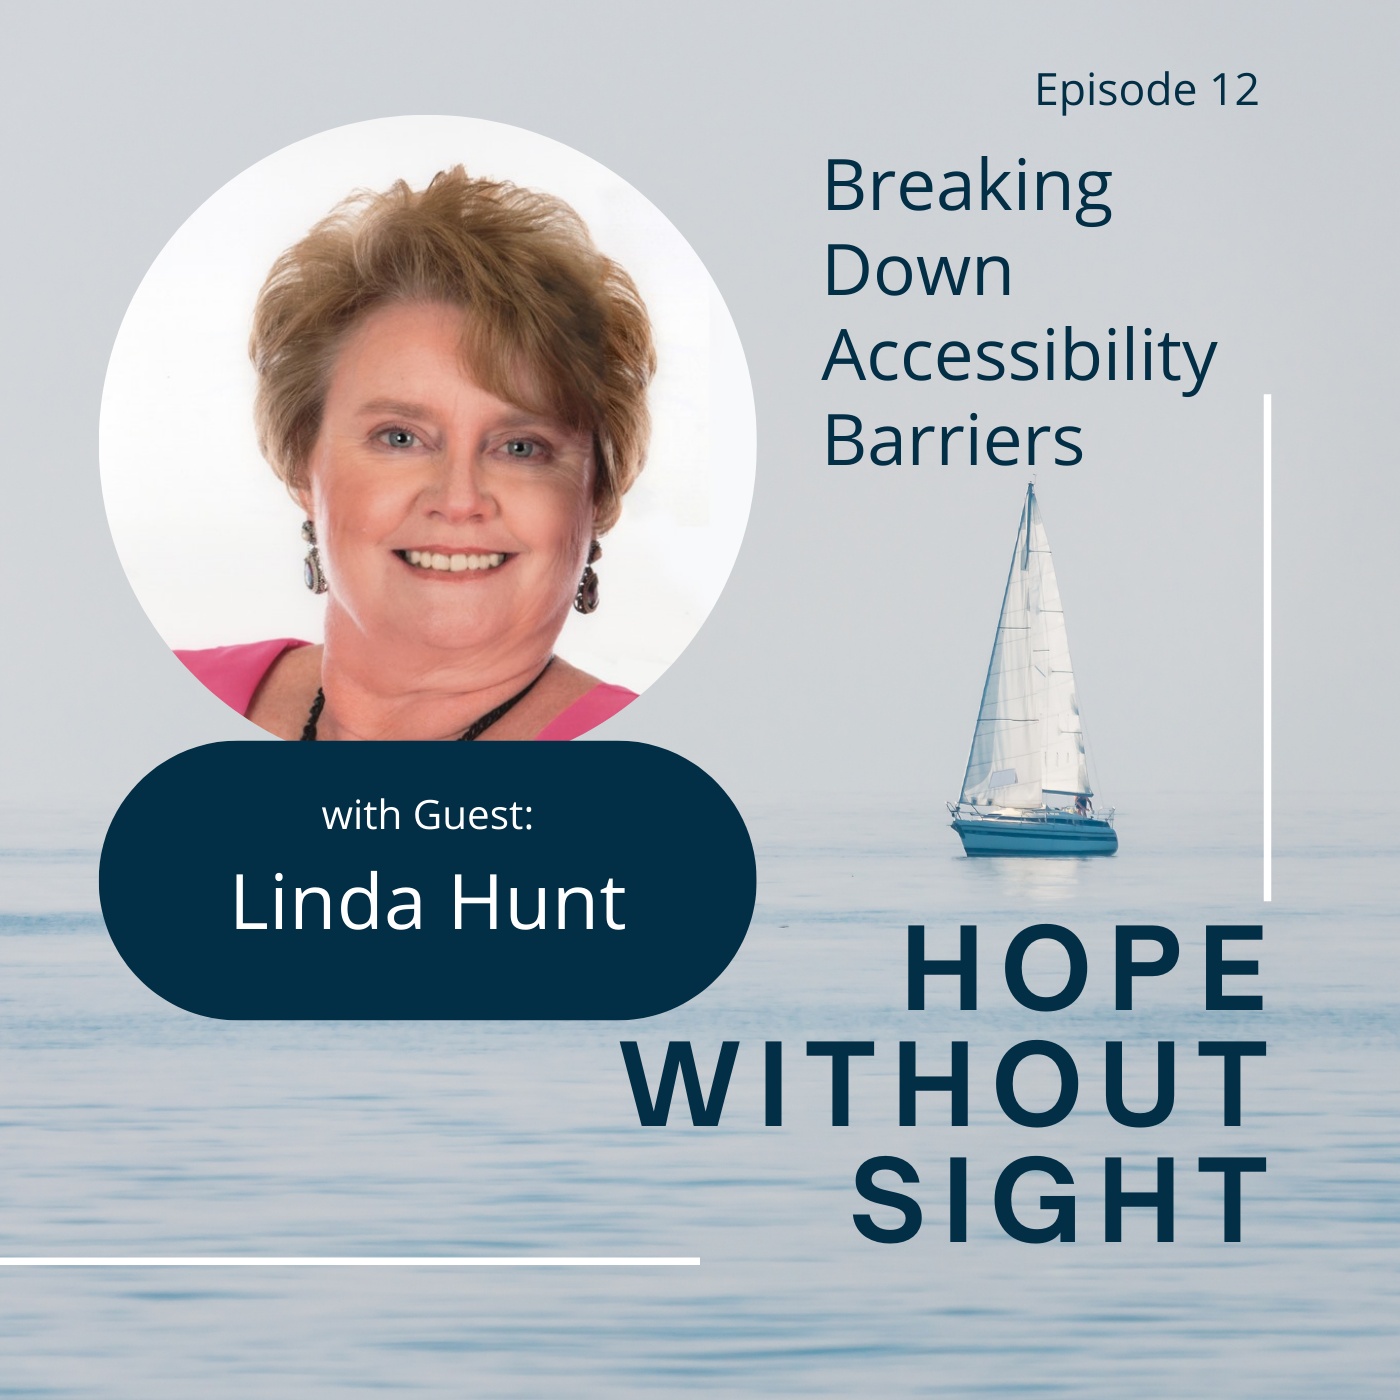 Linda Hunt Is Breaking Down Accessibility Barriers